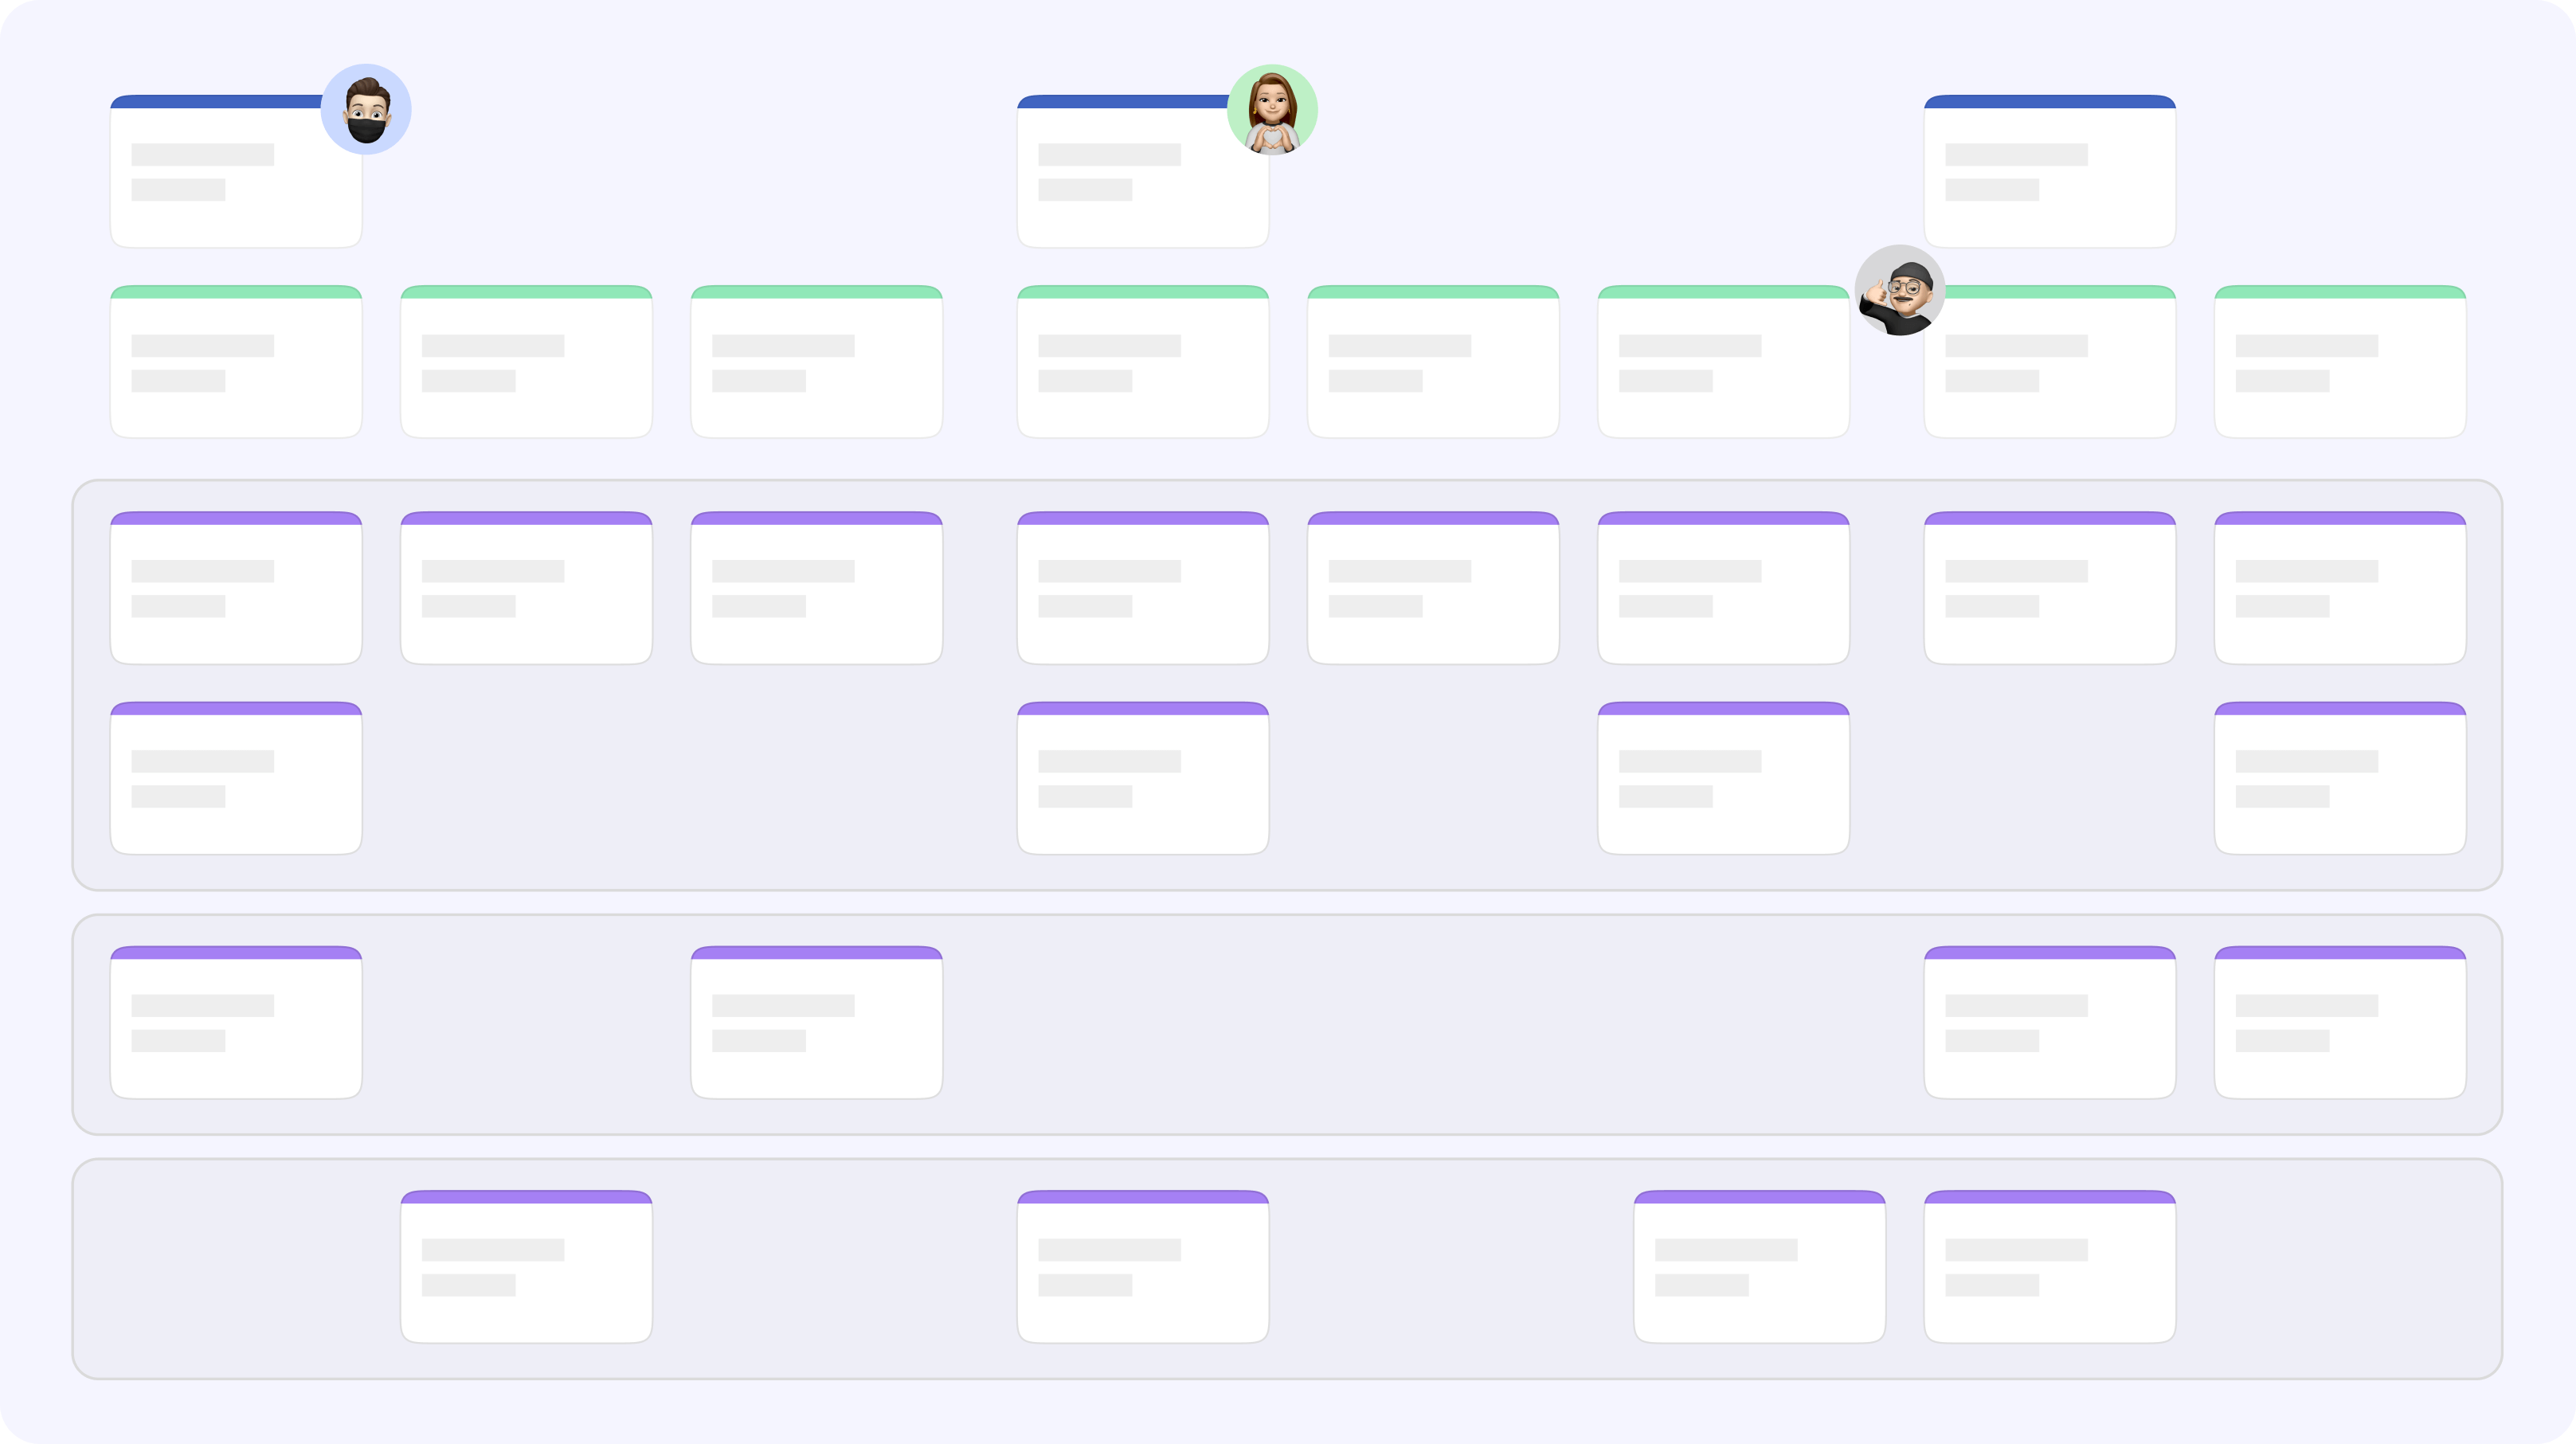 An image of a user story map